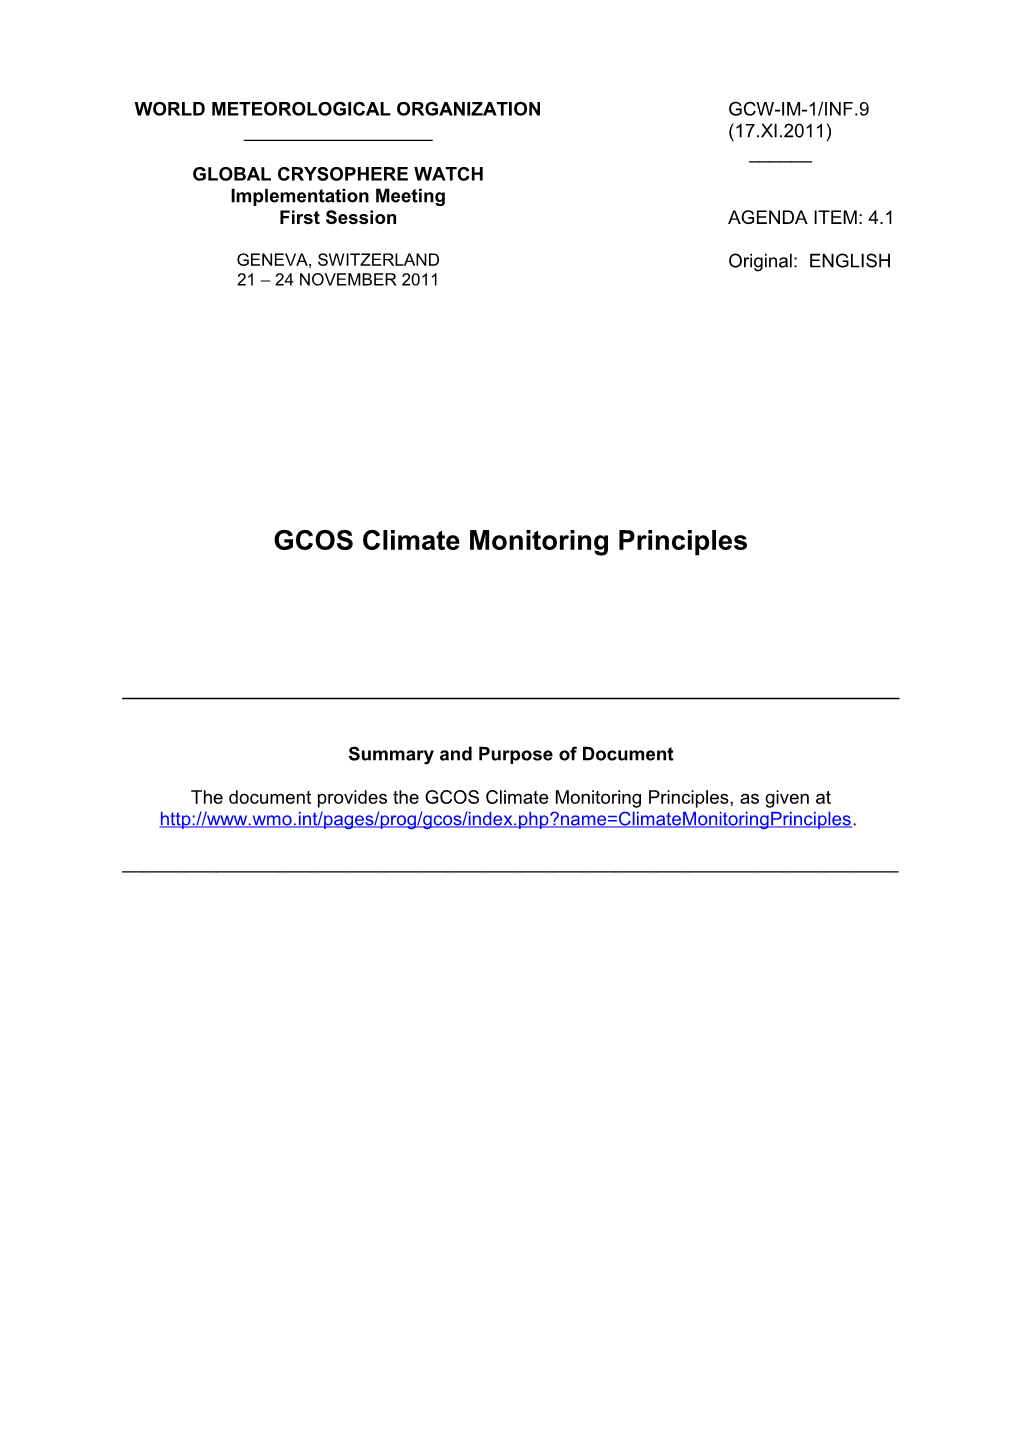 Gcos Implementation Issues at the National Level